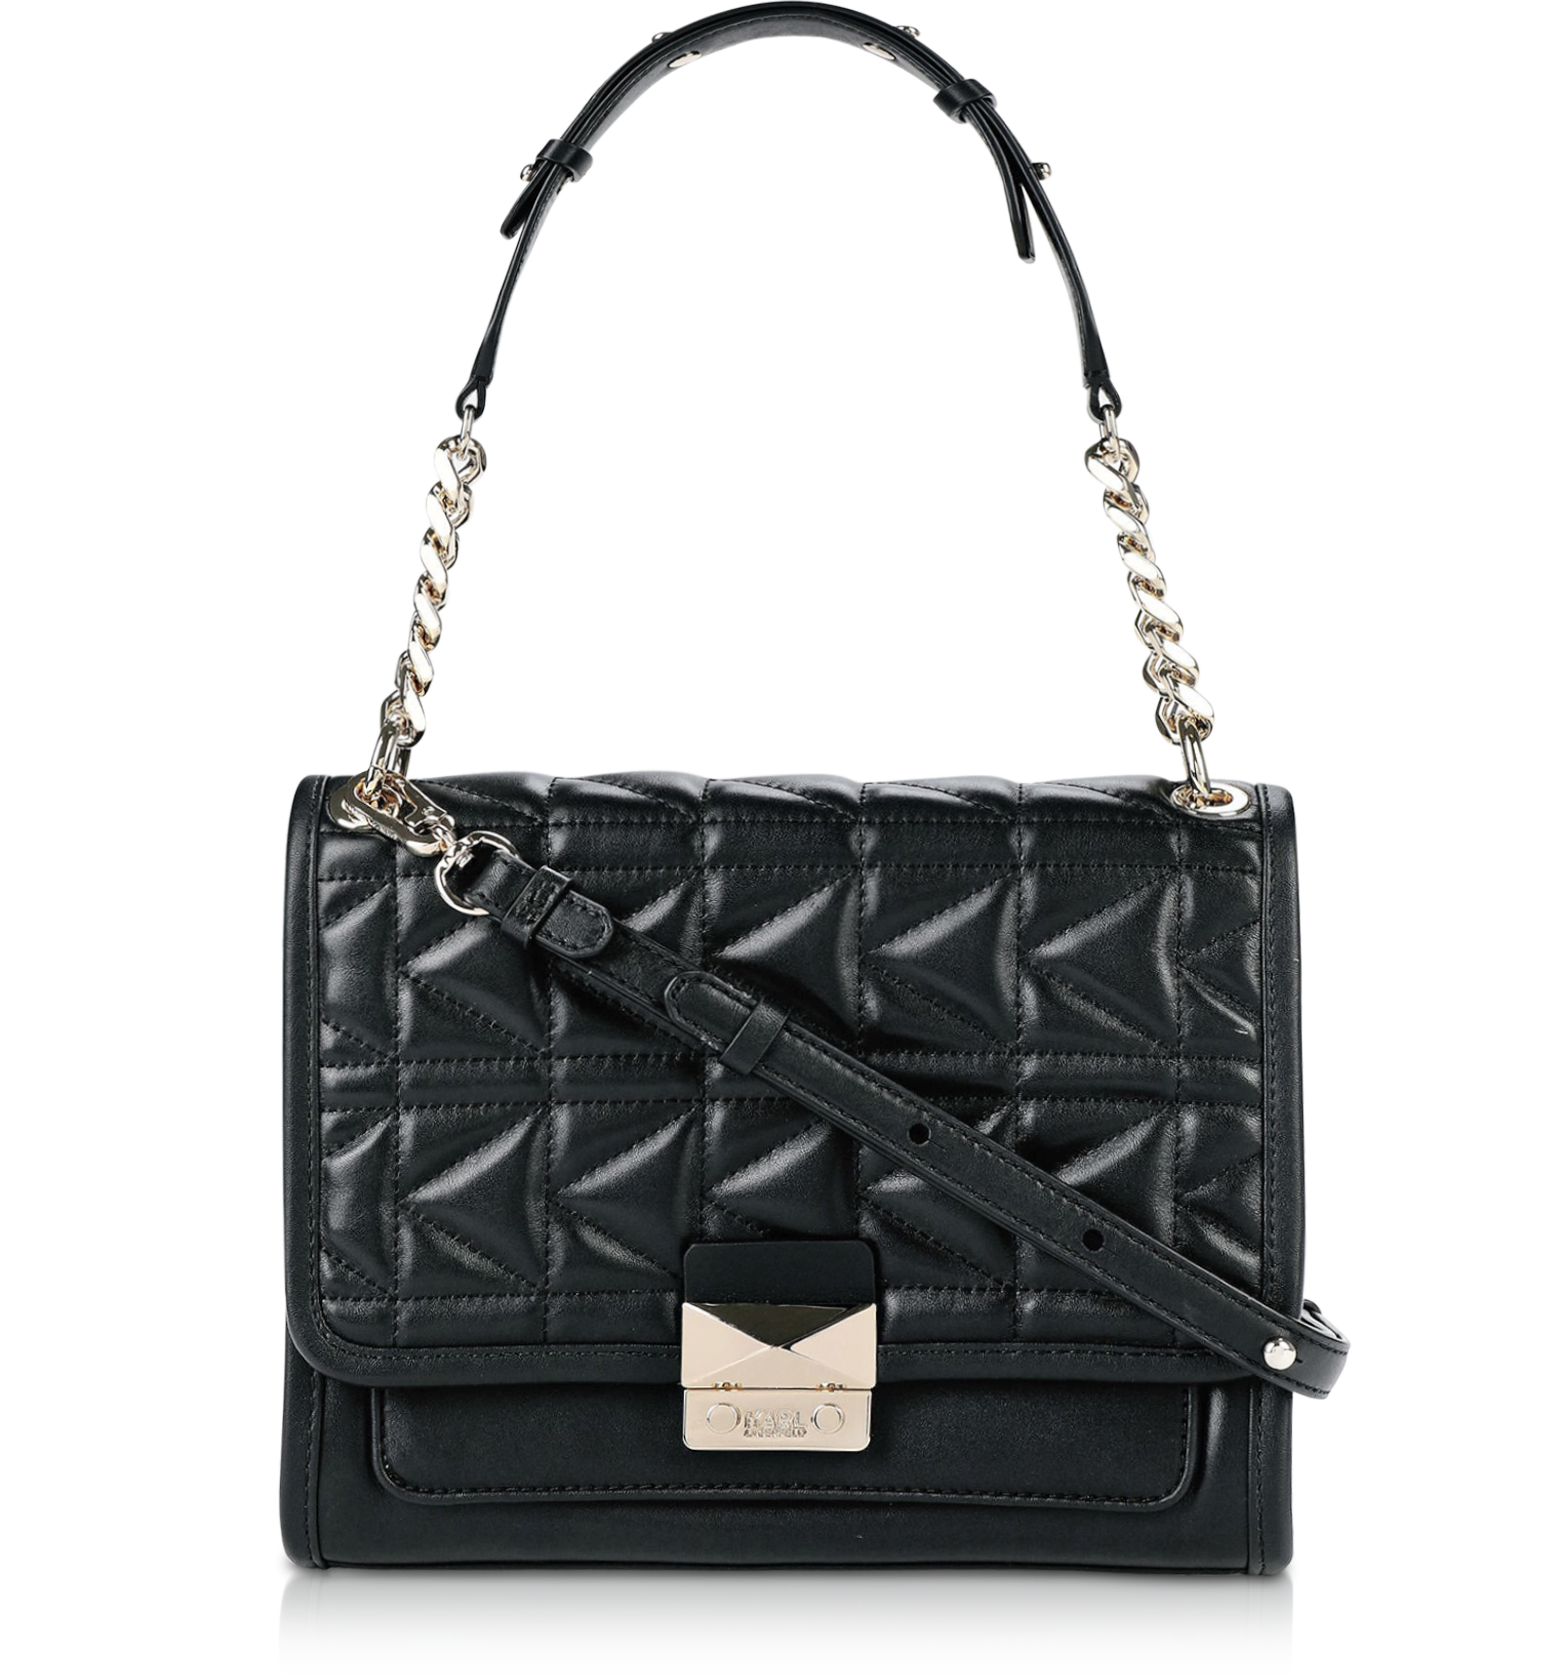 Karl Lagerfeld K/Kuilted Leather Shoulder Bag at FORZIERI